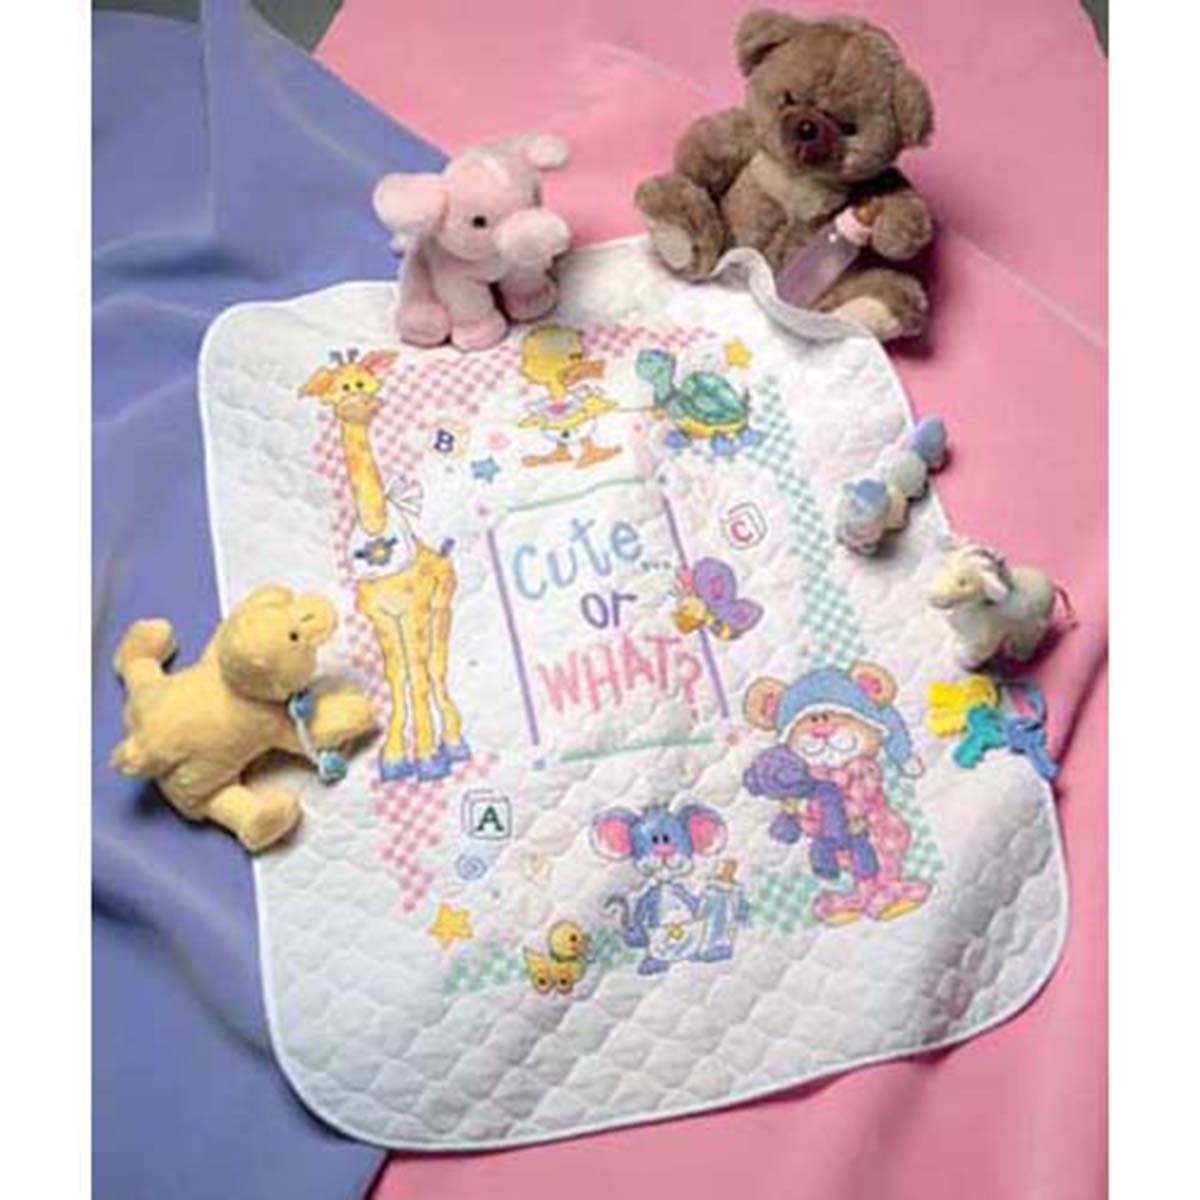 Dimensions 34 x 43 Baby Drawers Quilt Stamped Cross Stitch Kit